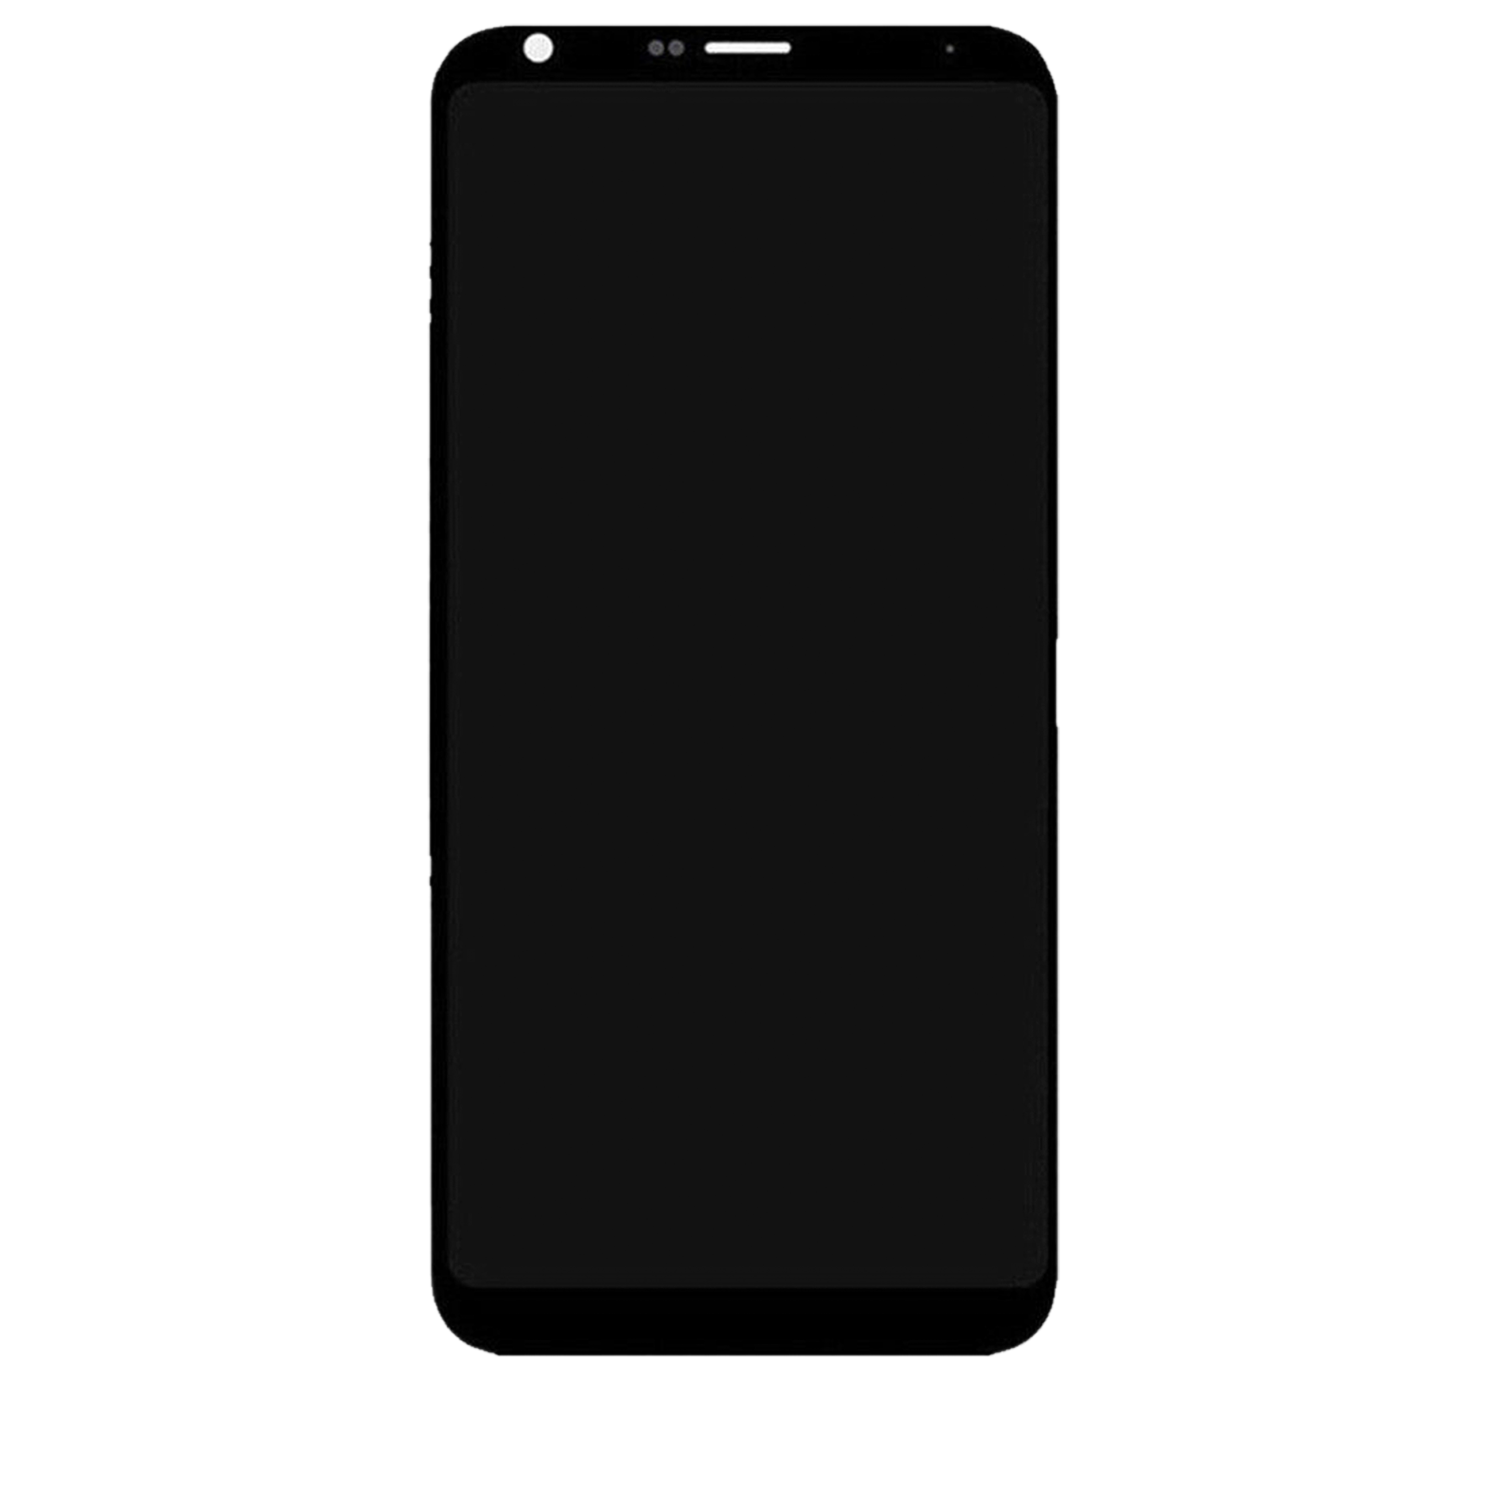 Replacement LCD Assembly Without Frame Compatible For LG Q7 / Q7 Plus / Q7 Alpha (Refurbished) (All Colors)